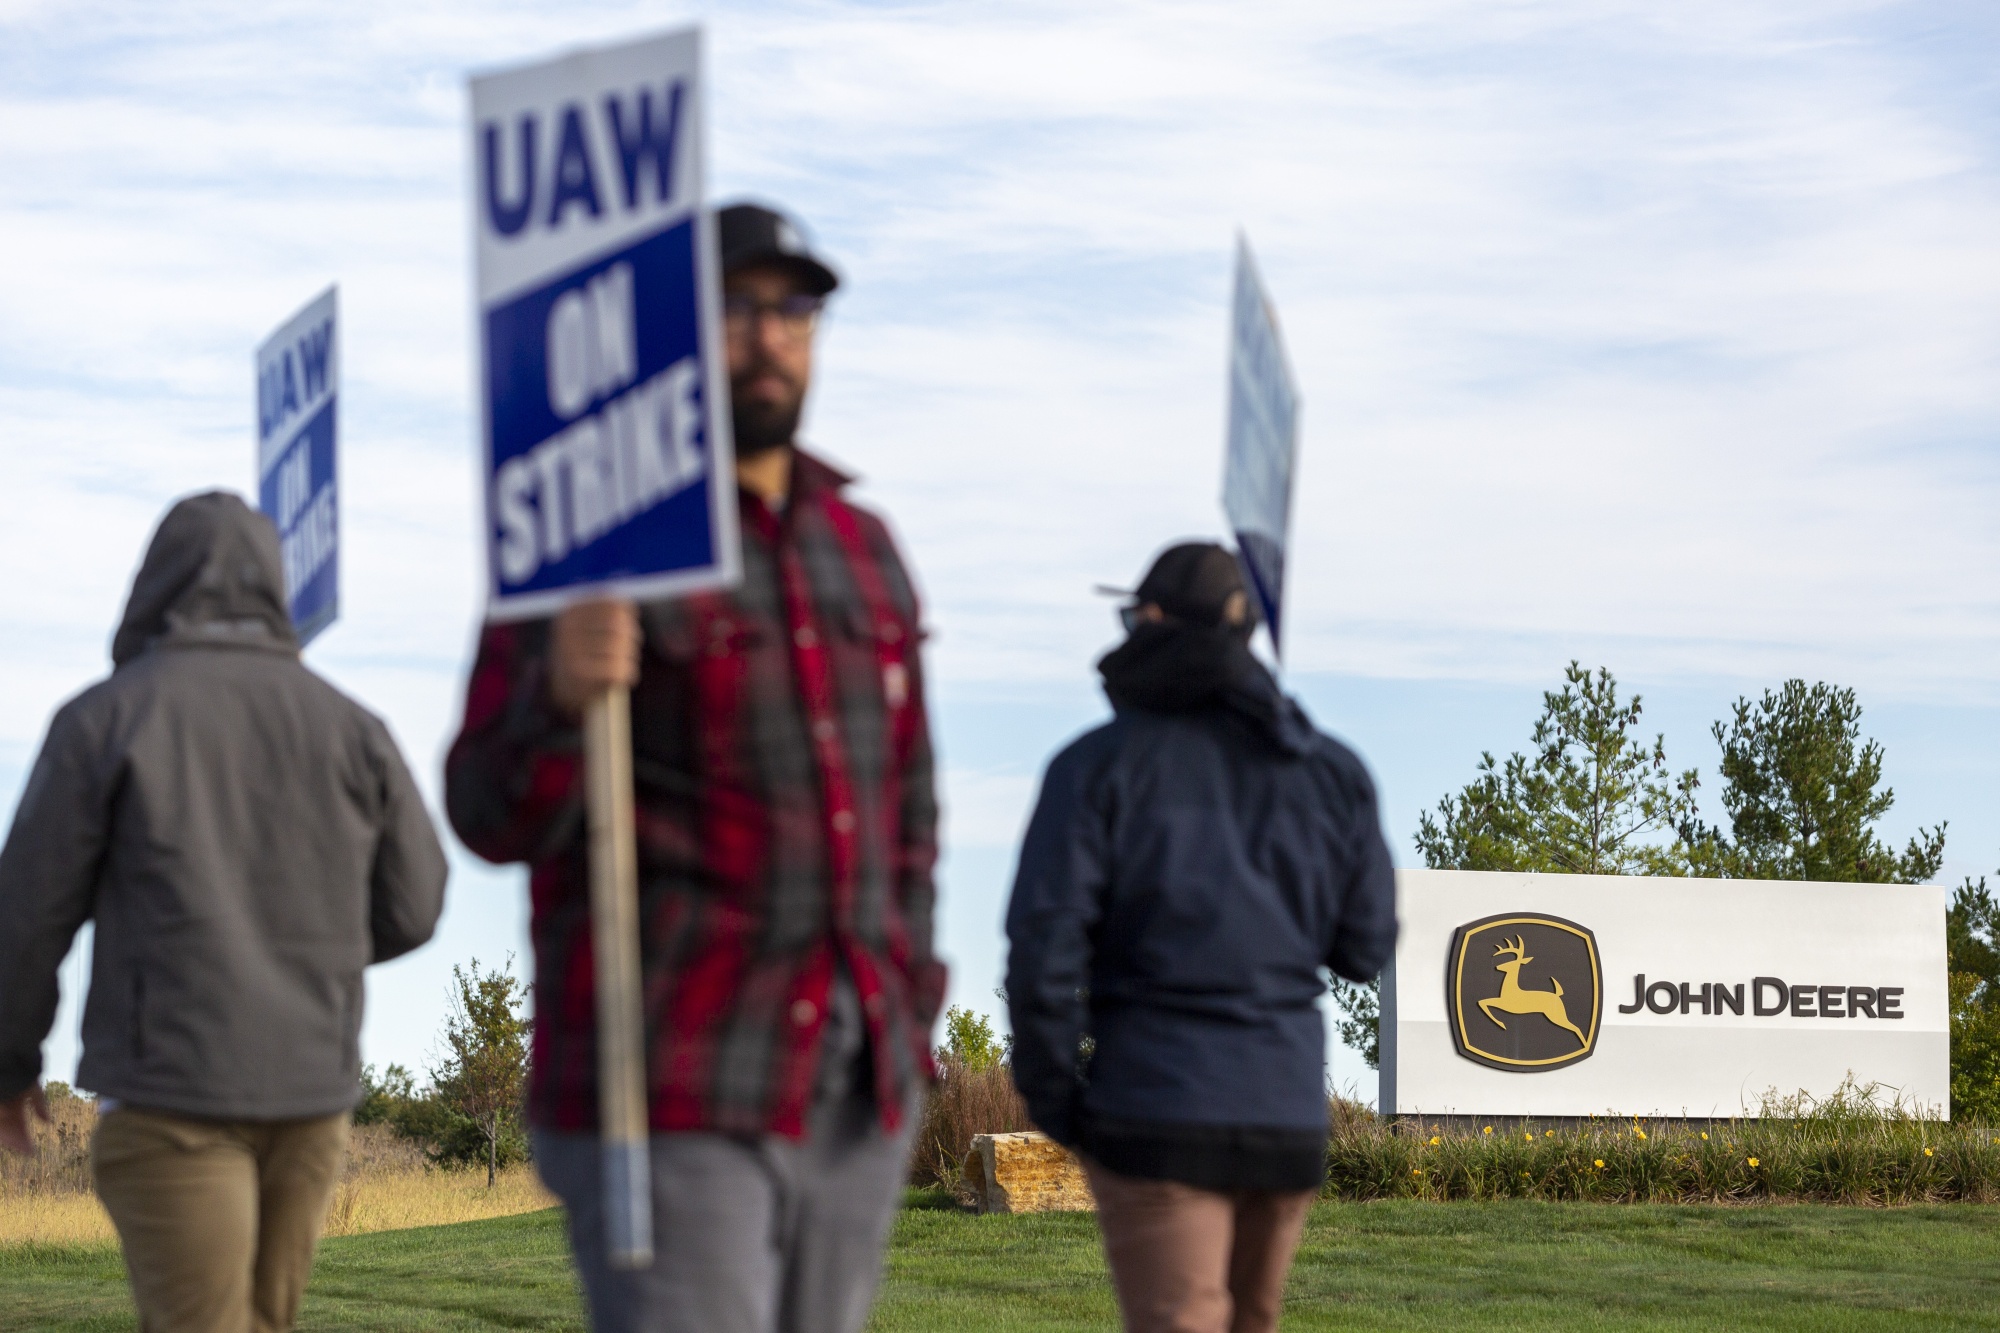 Workers hold signs during a strike outside the John Deere Des Moines Works facility in Ankeny, Iowa, on Oct. 15.